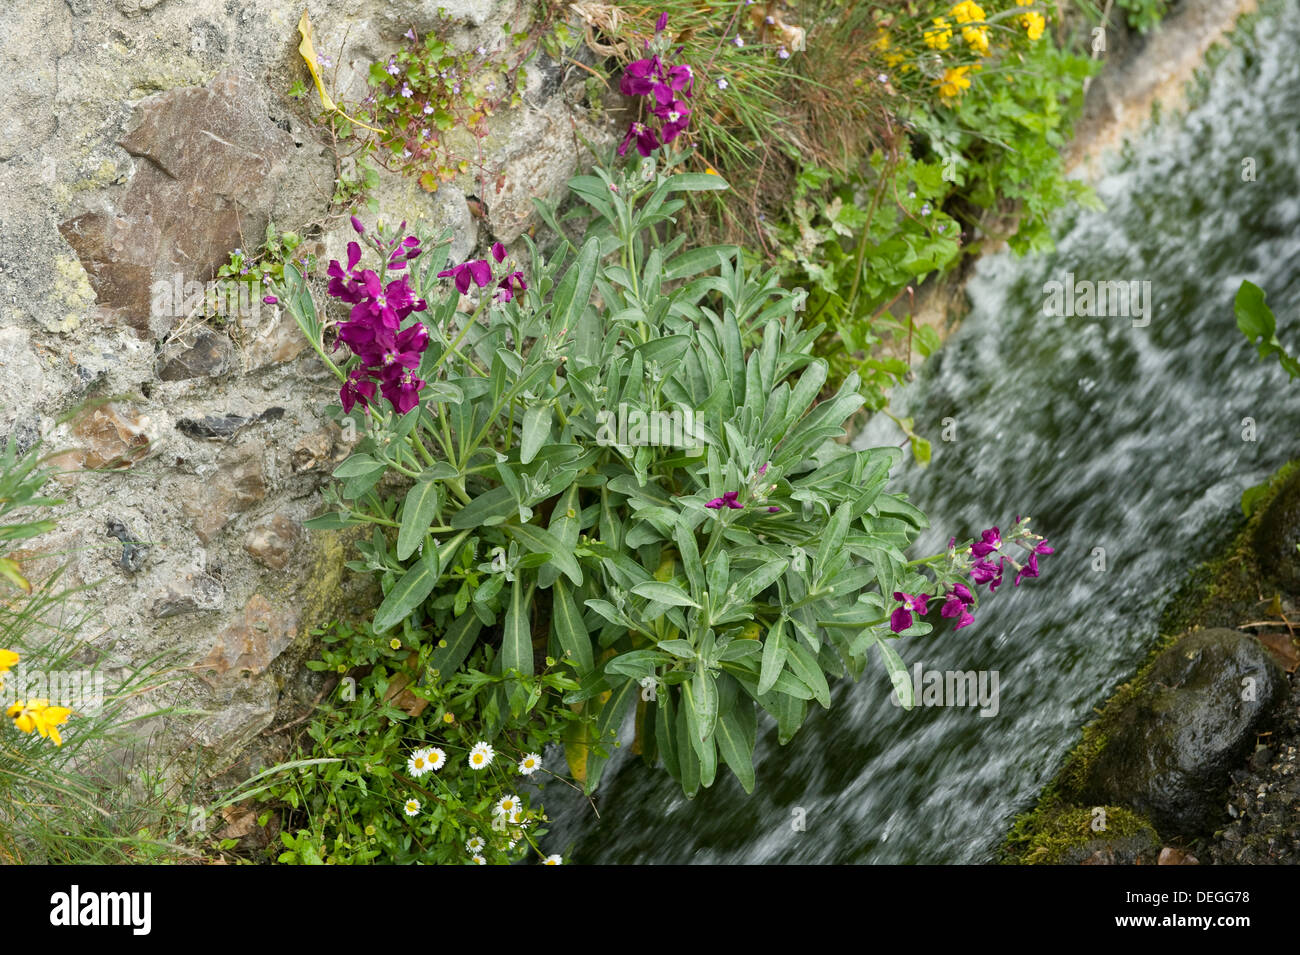 Hoary stock, Matthiola incana, flowering with other vegetation on the cliffs at Beer Beach in Devon Stock Photo